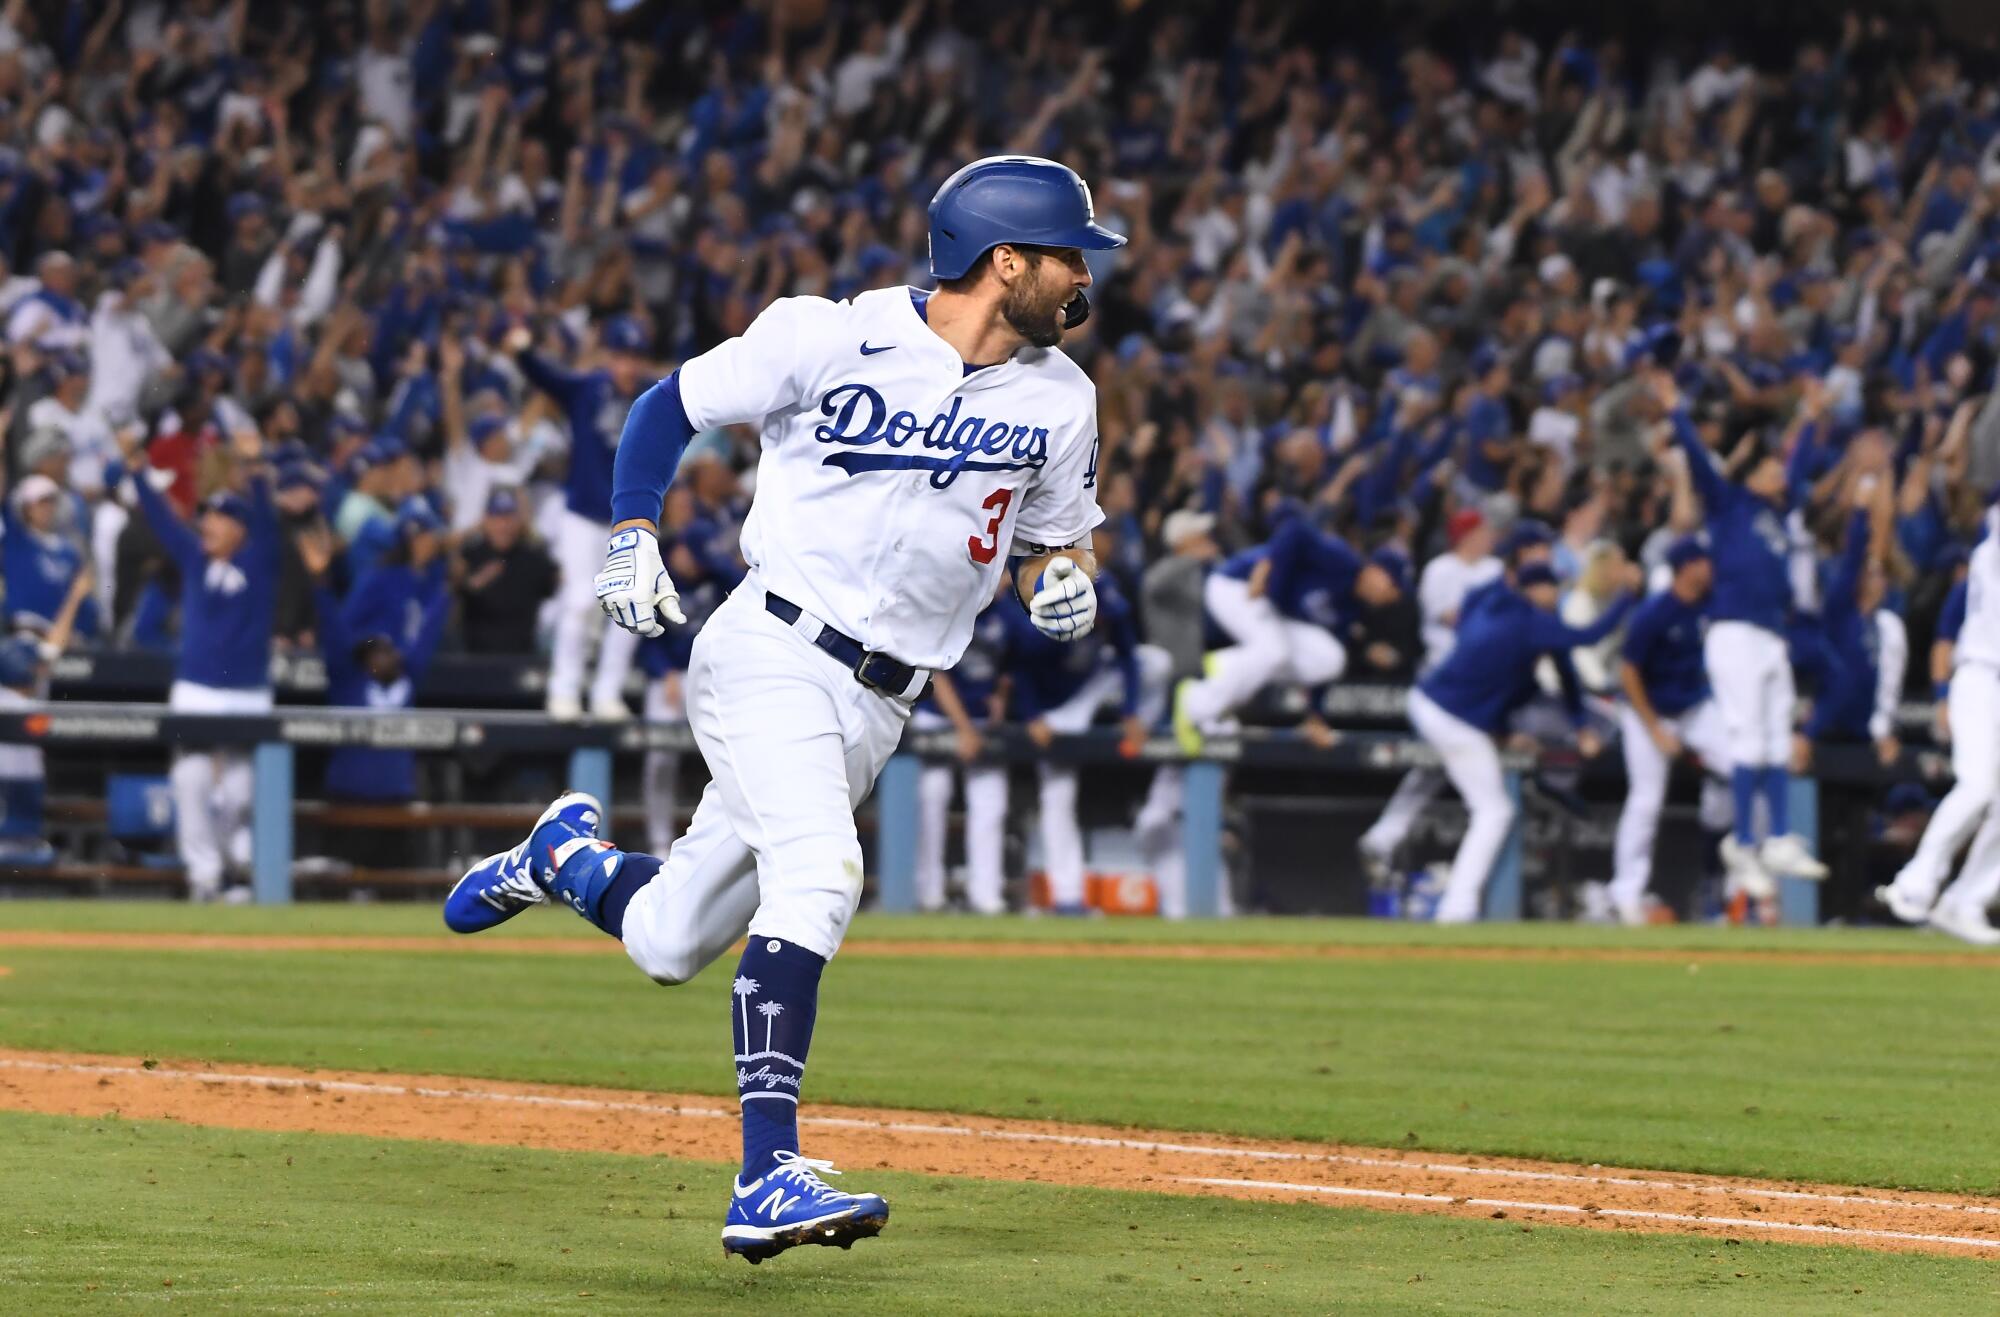 Chris Taylor rounds the bases after hitting the game-winning two-run home run.